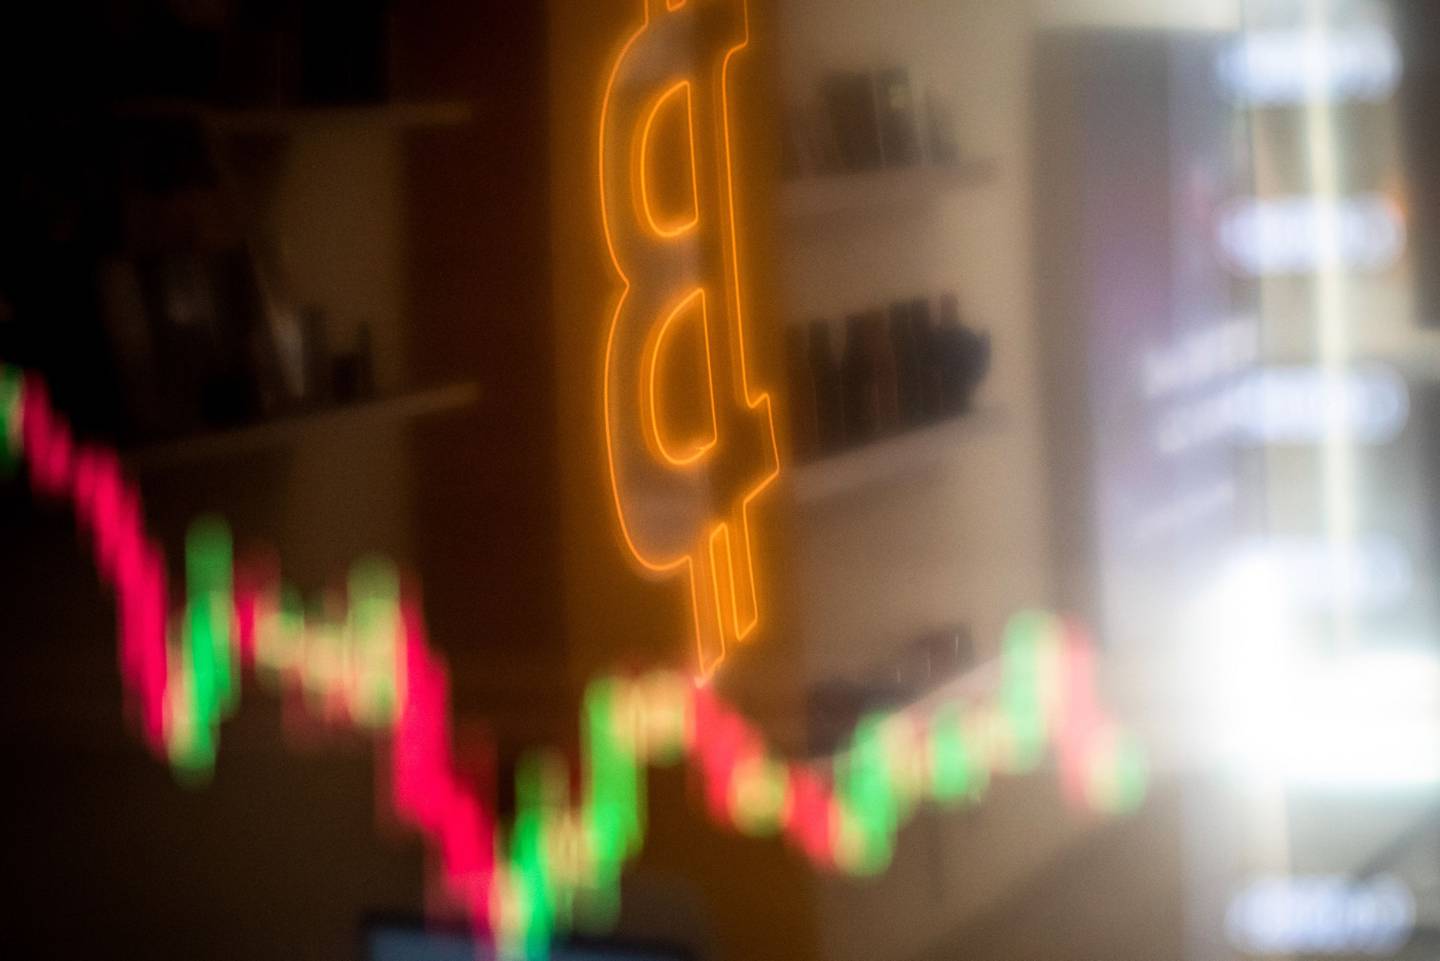 A reflection of a candlestick price chart and an illuminated Bitcoin logo inside a BitBase cryptocurrency exchange in Barcelona, Spain, on Monday, May 16, 2022. The wipeout of algorithmic stablecoin TerraUSD and its sister token Luna knocked more than $270 billion off the crypto sectors total trillion-dollar value in the most volatile week for Bitcoin trading in at least two years. Photographer: Angel Garcia/Bloombergdfd